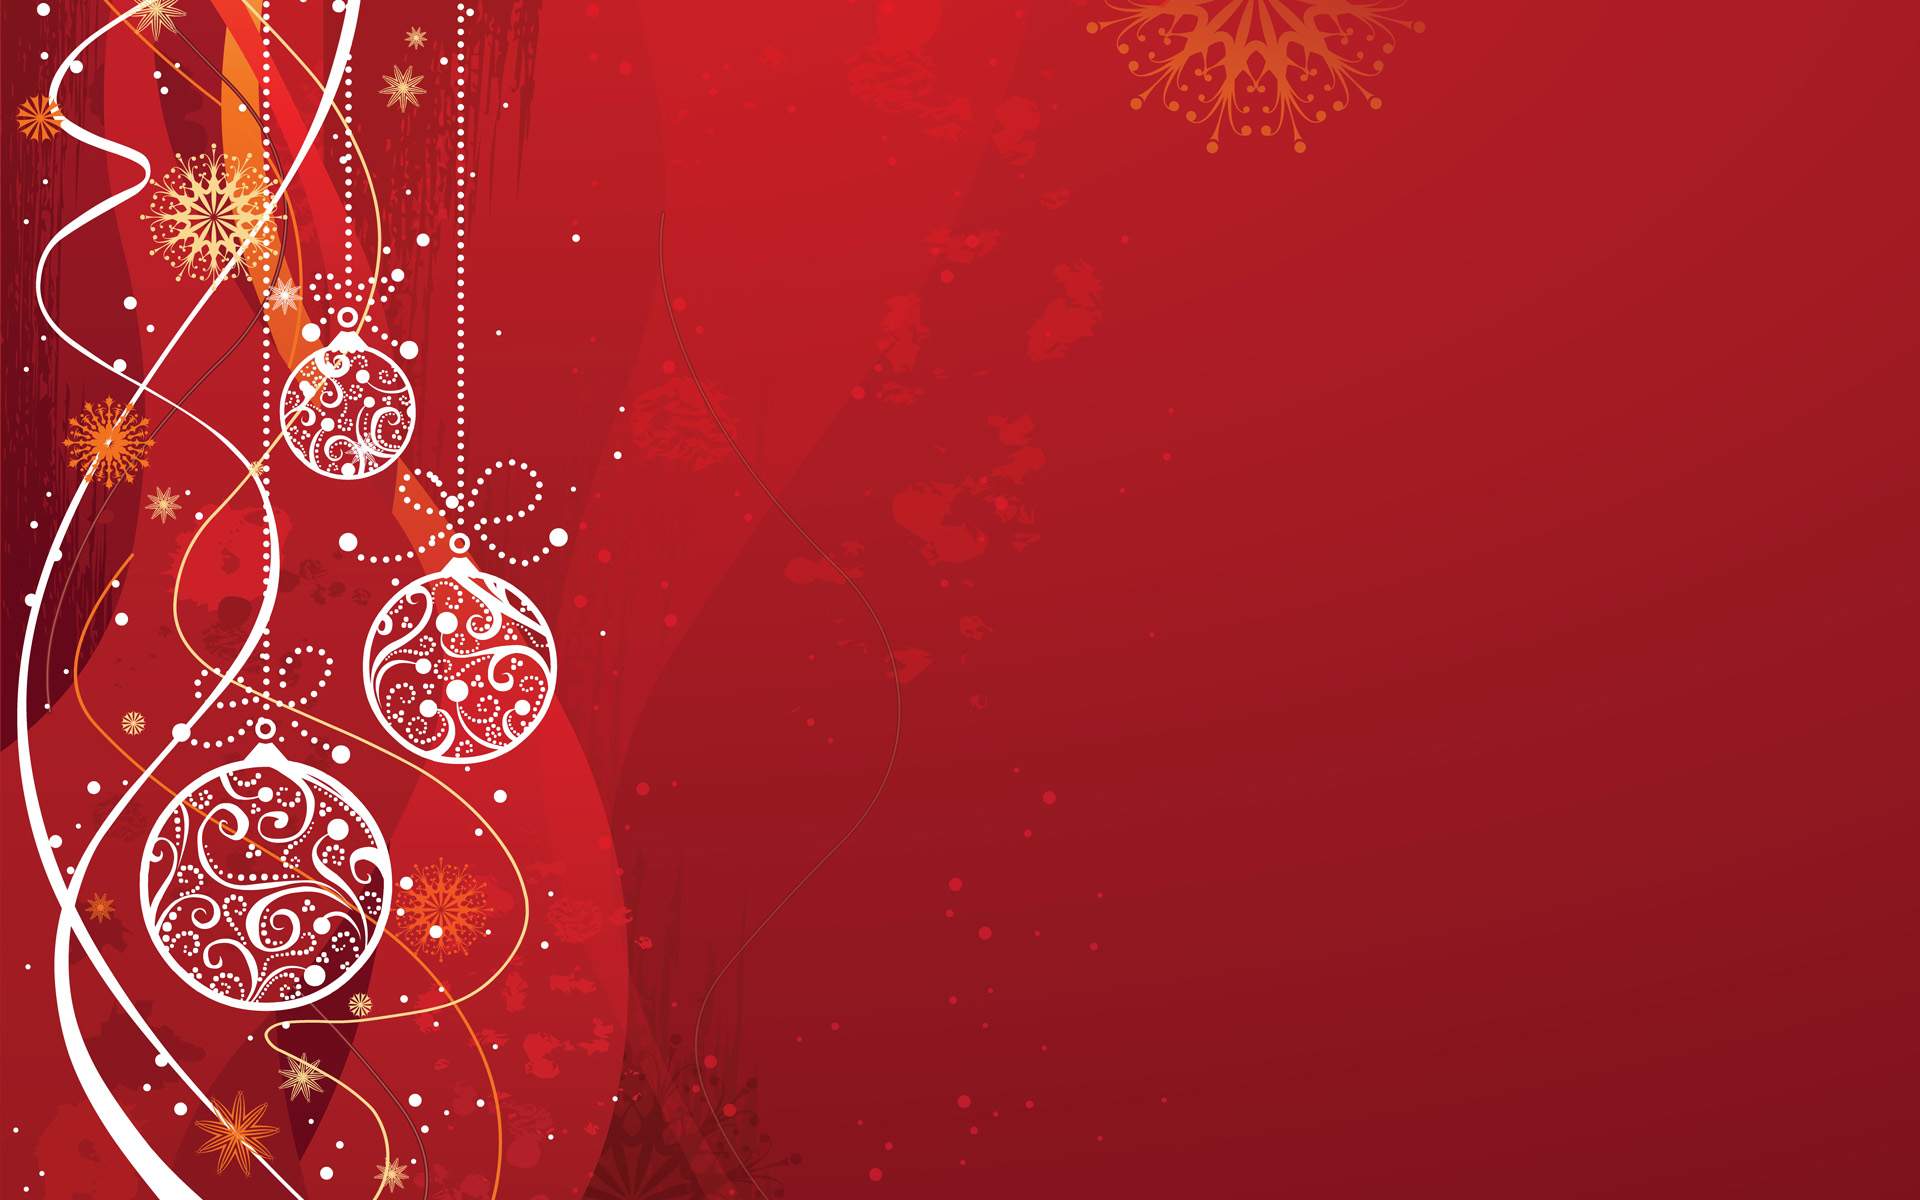 Large Christmas Backgrounds Group (62+)